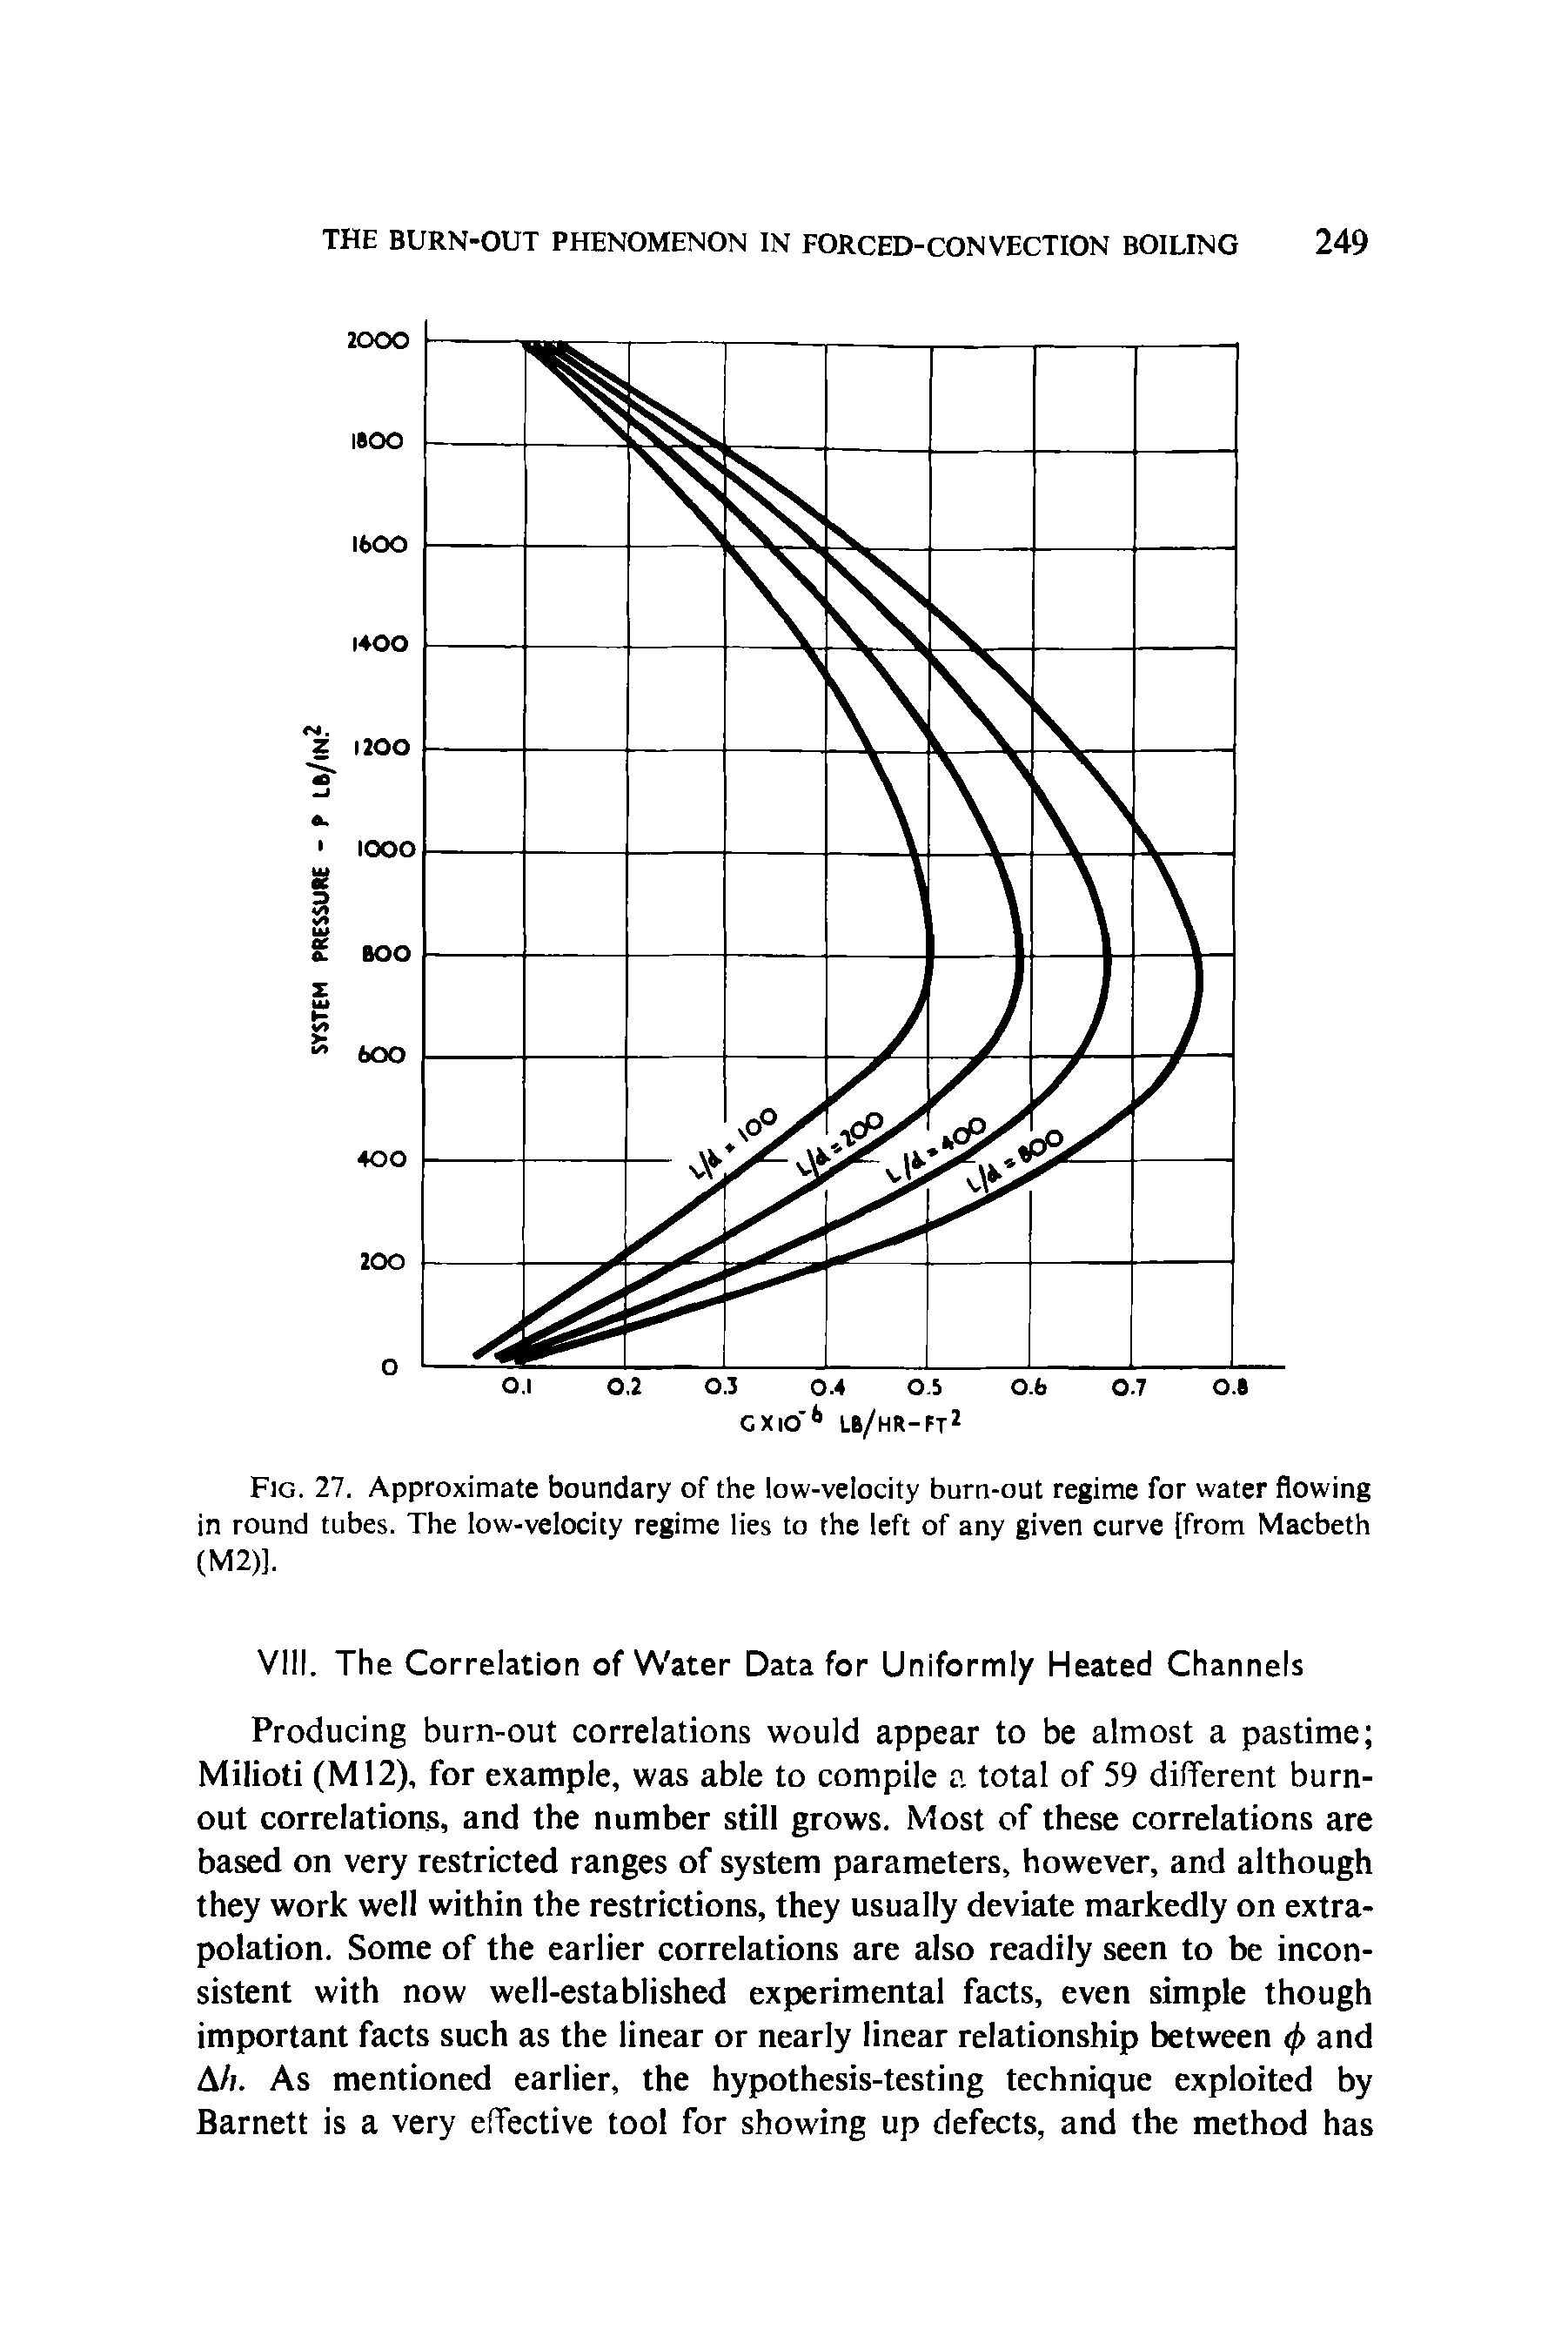 Fig. 27. Approximate boundary of the low-velocity burn-out regime for water flowing in round tubes. The low-velocity regime lies to the left of any given curve [from Macbeth (M2)].